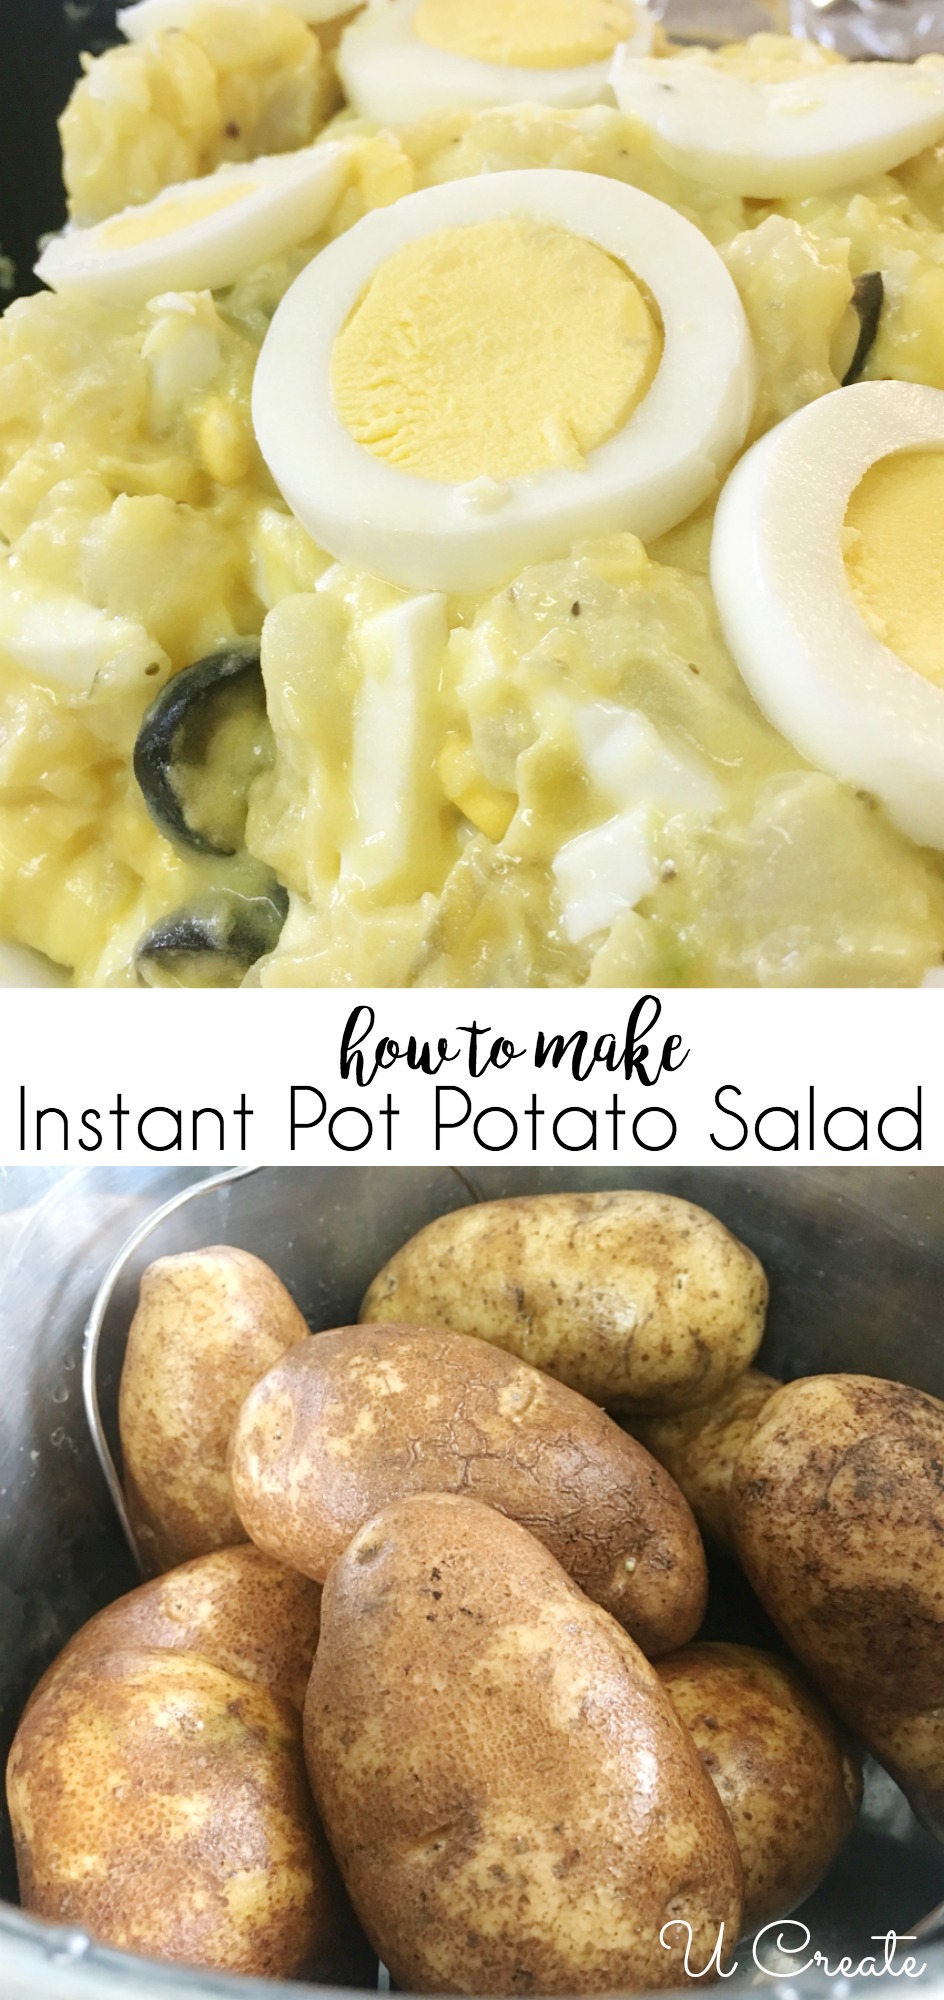 How to Make Instant Pot Potato Salad - so easy and delicious!